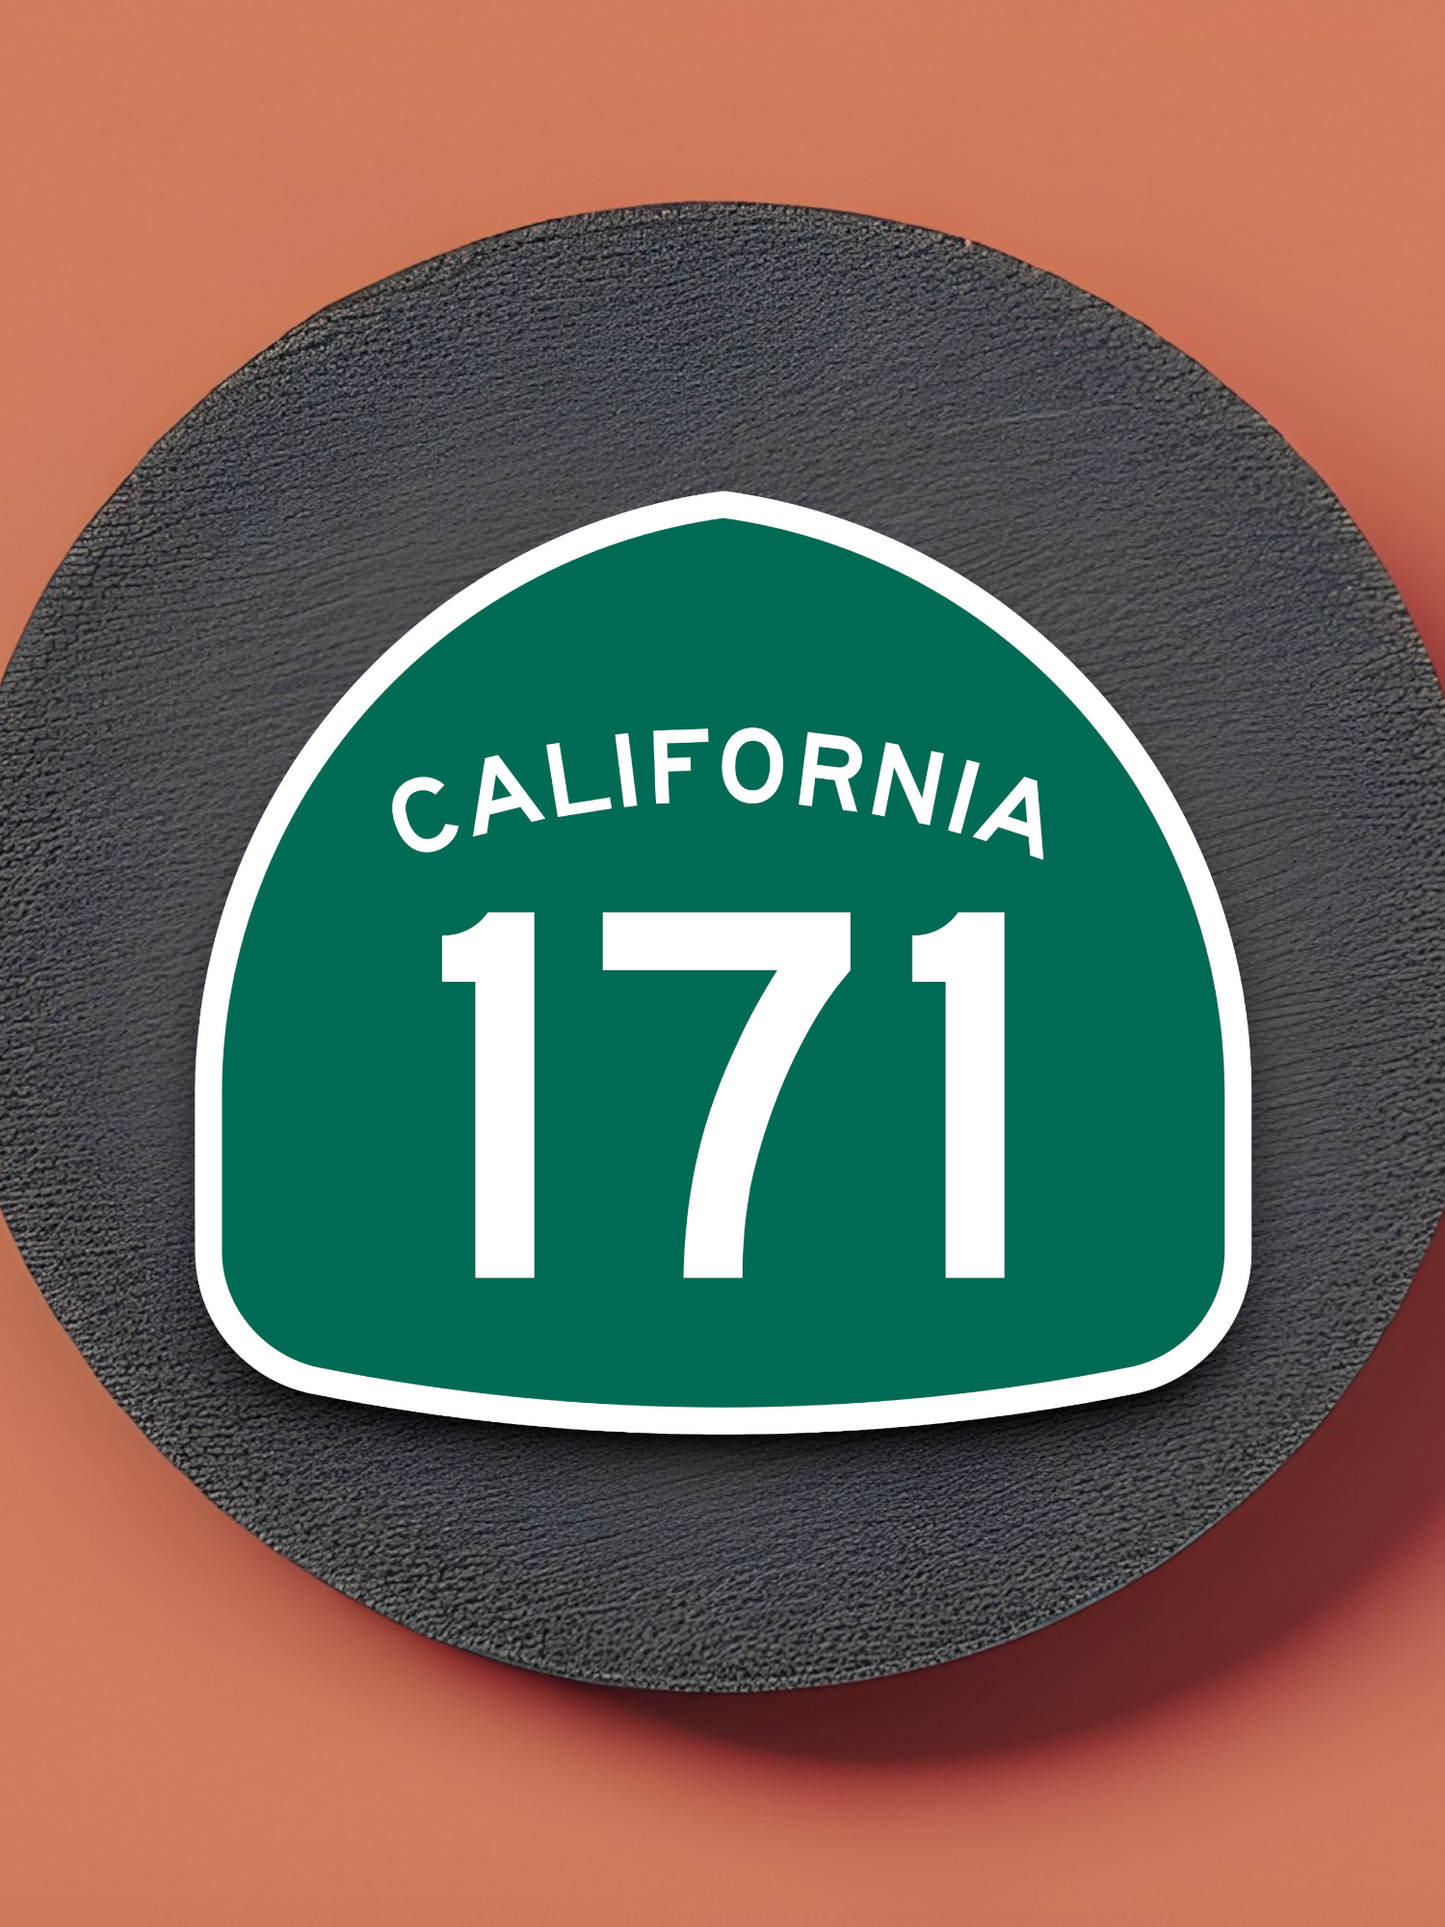 California State Route 171 Road Sign Sticker